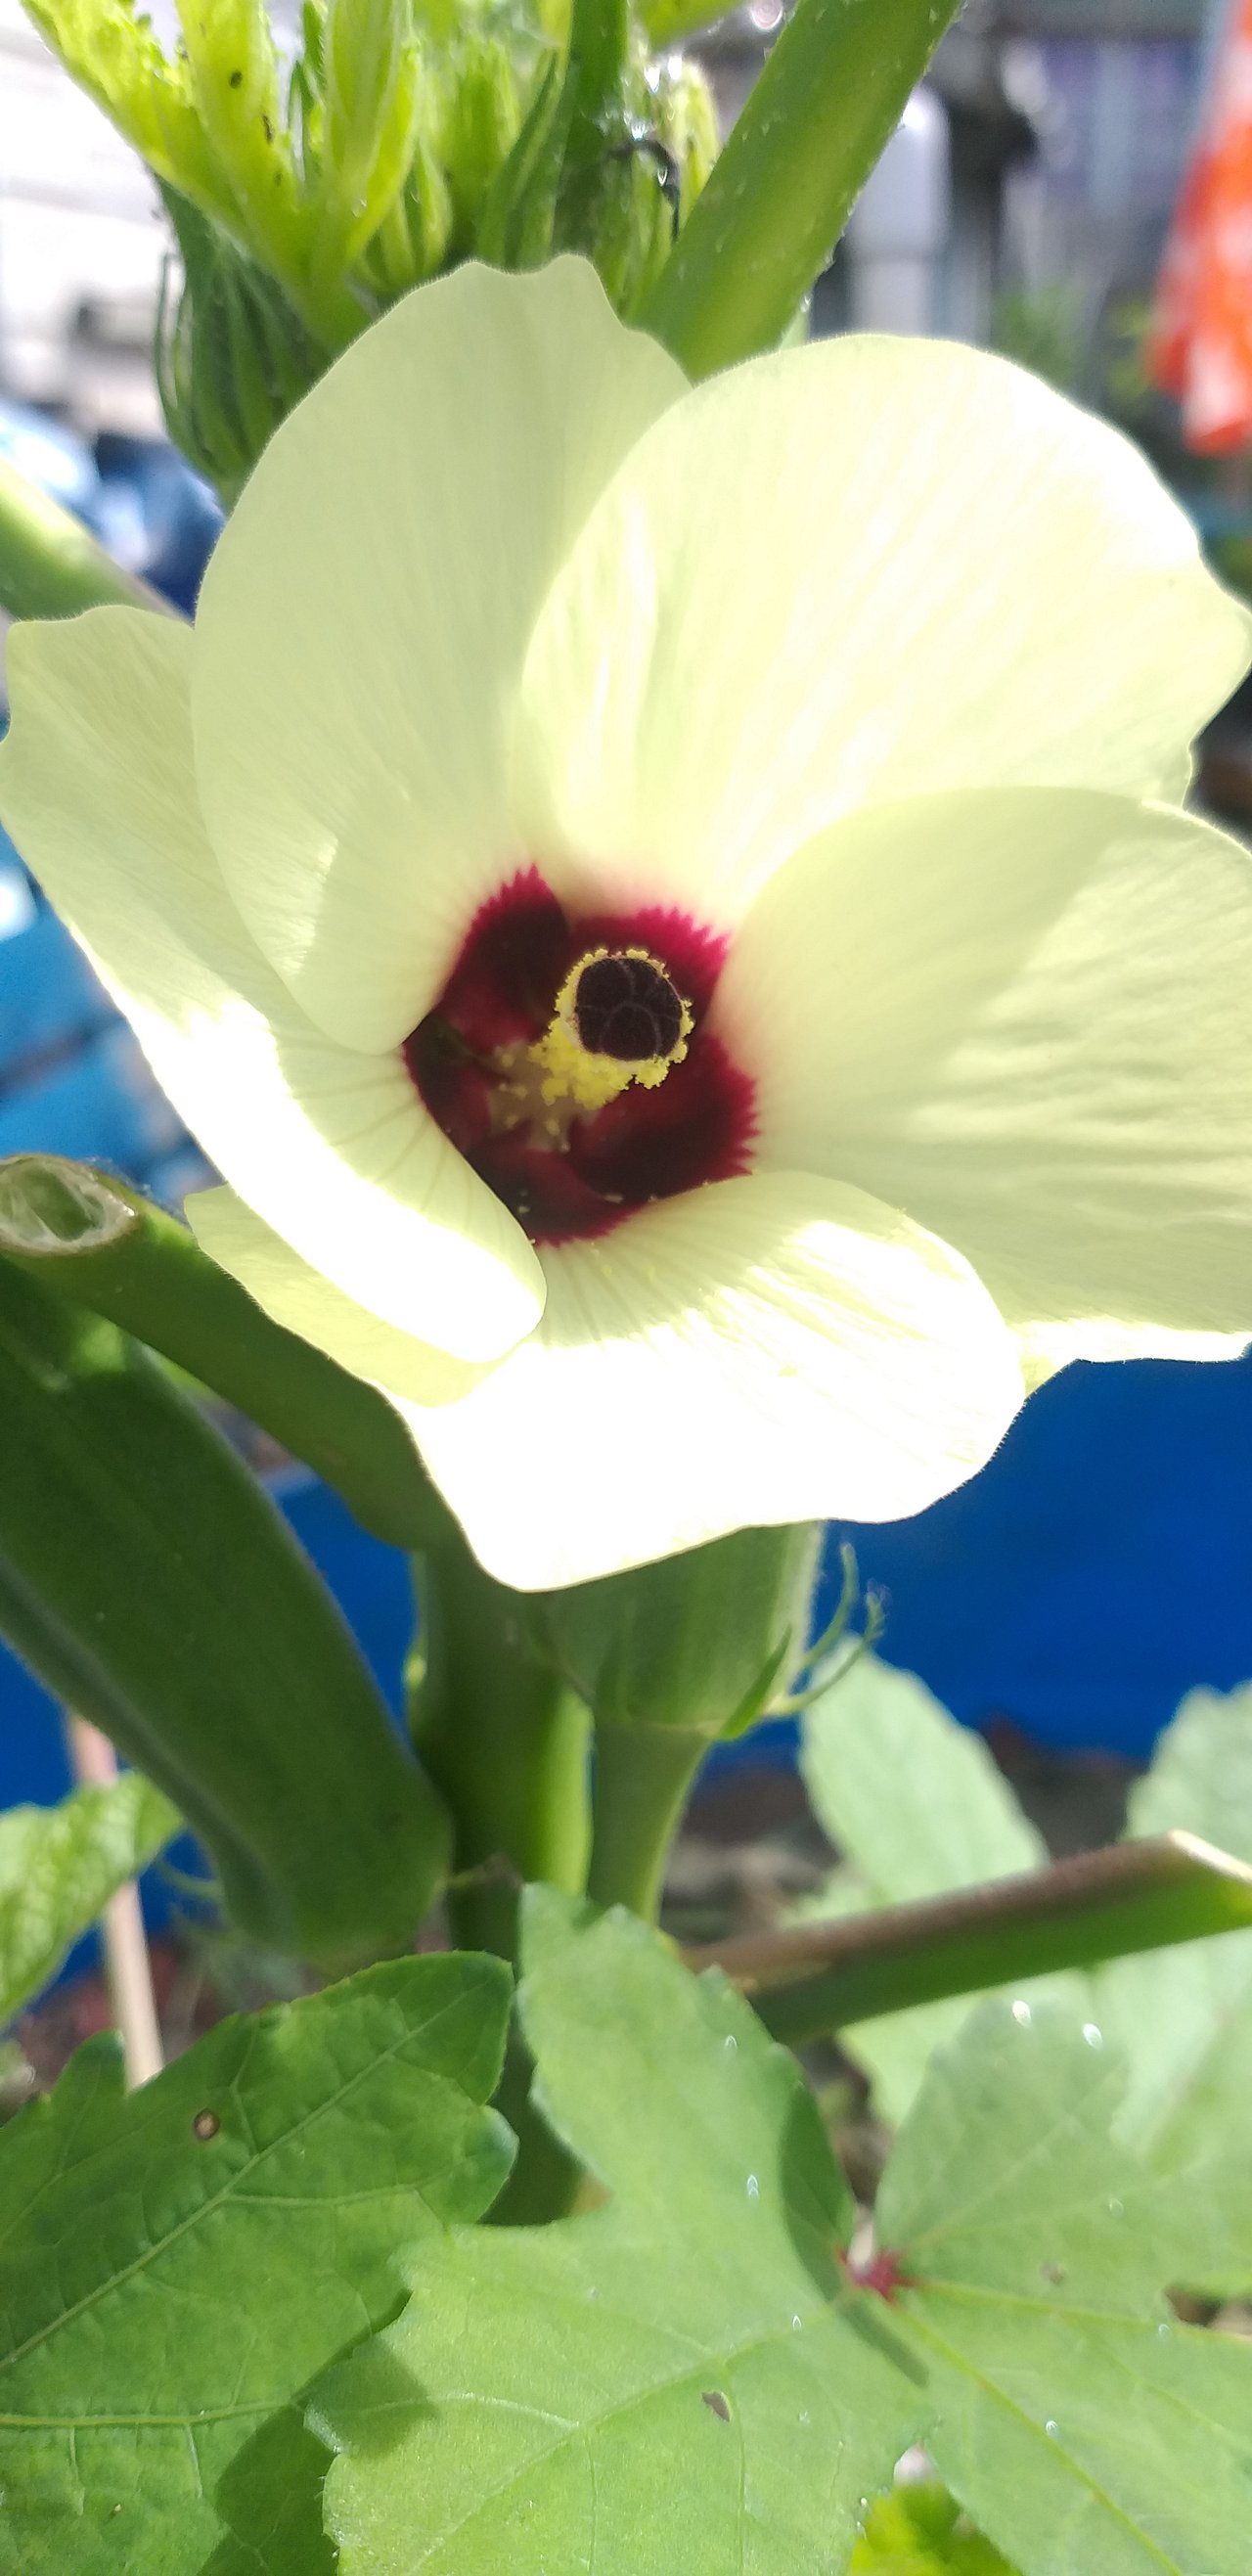 A triving, beautiful bloom of an okra blossom, colored with a light yellow hue.